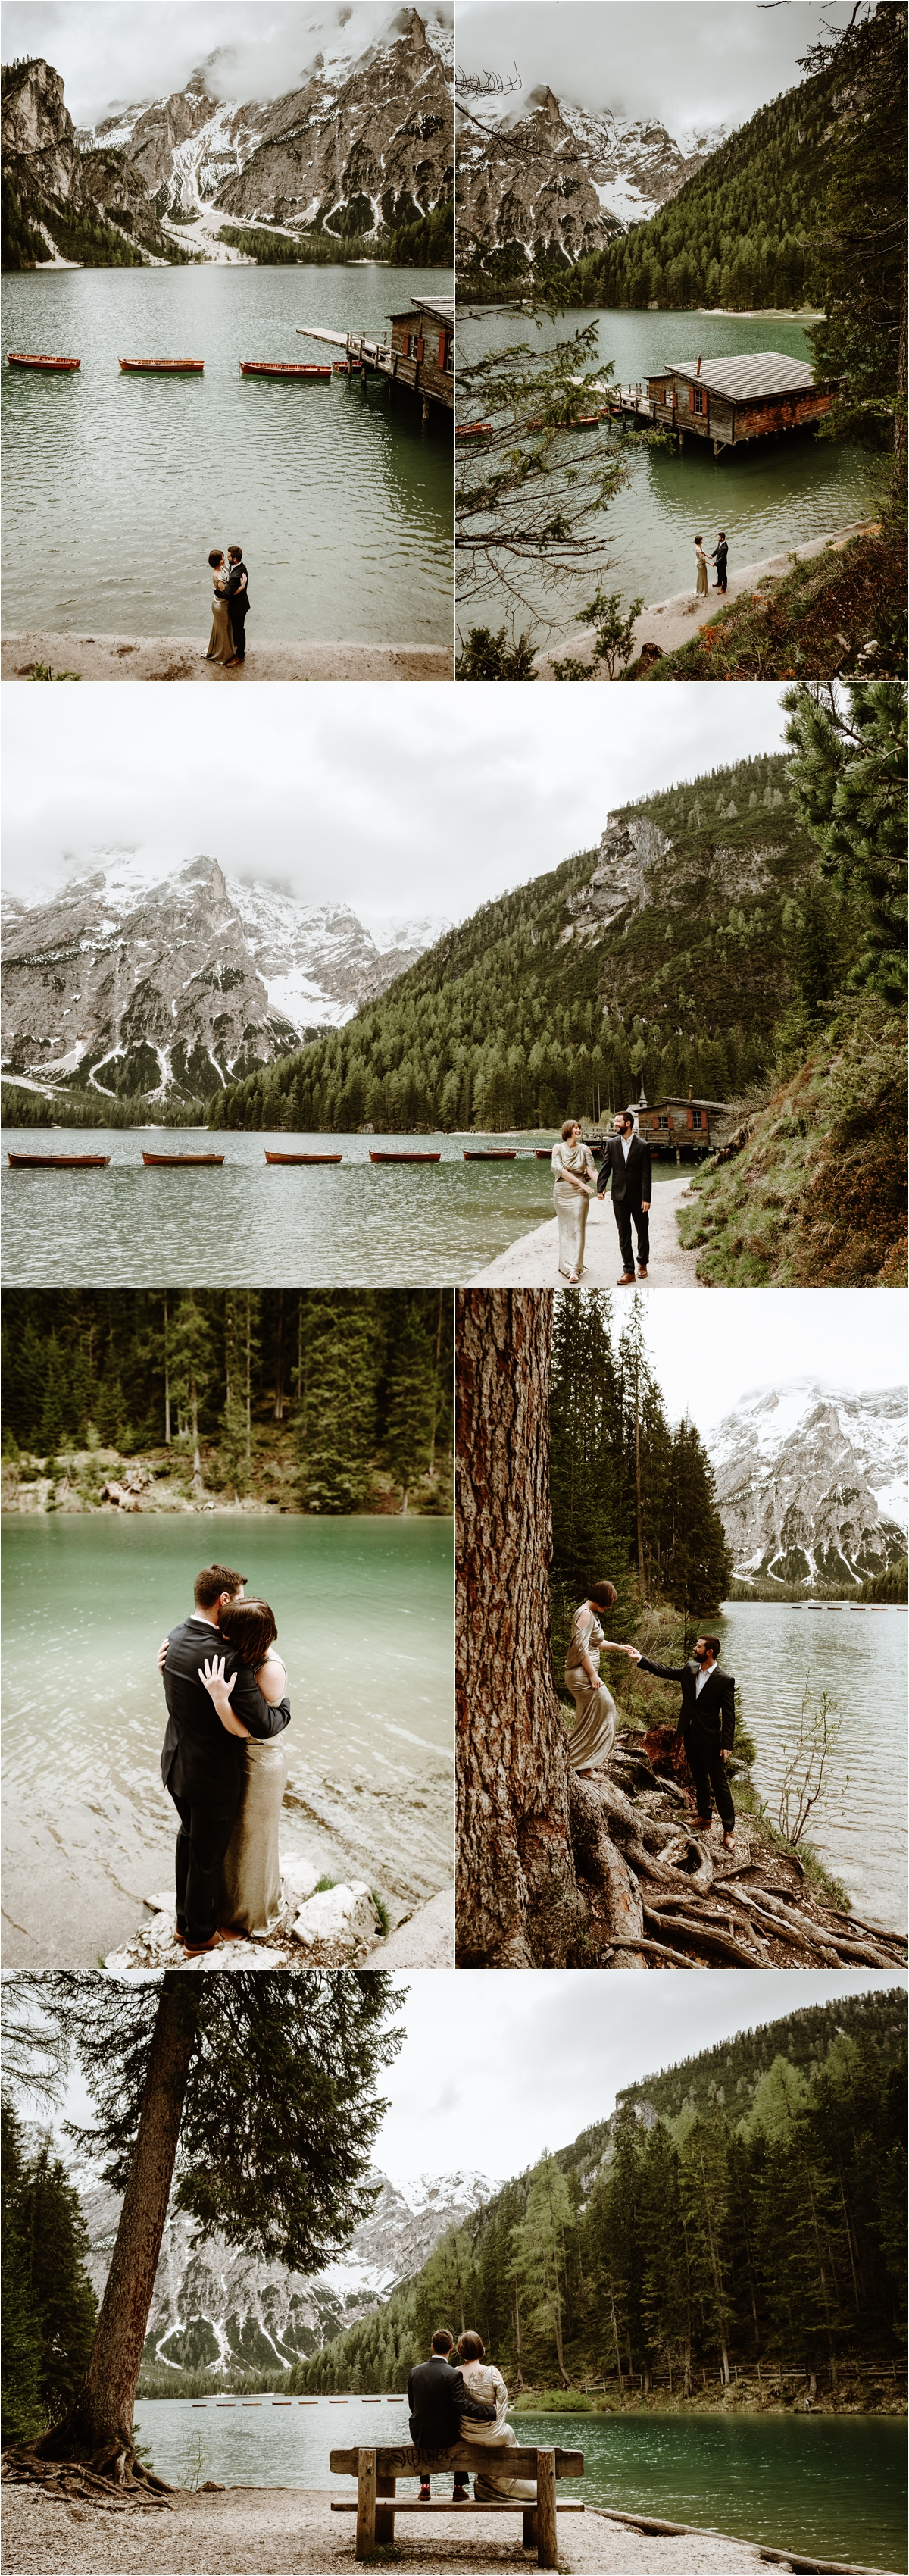 After the rain stops, Laurel & Dustin walk around the shores of Lake Braies in the Italian Alps. Photo by Wild Connections Photography